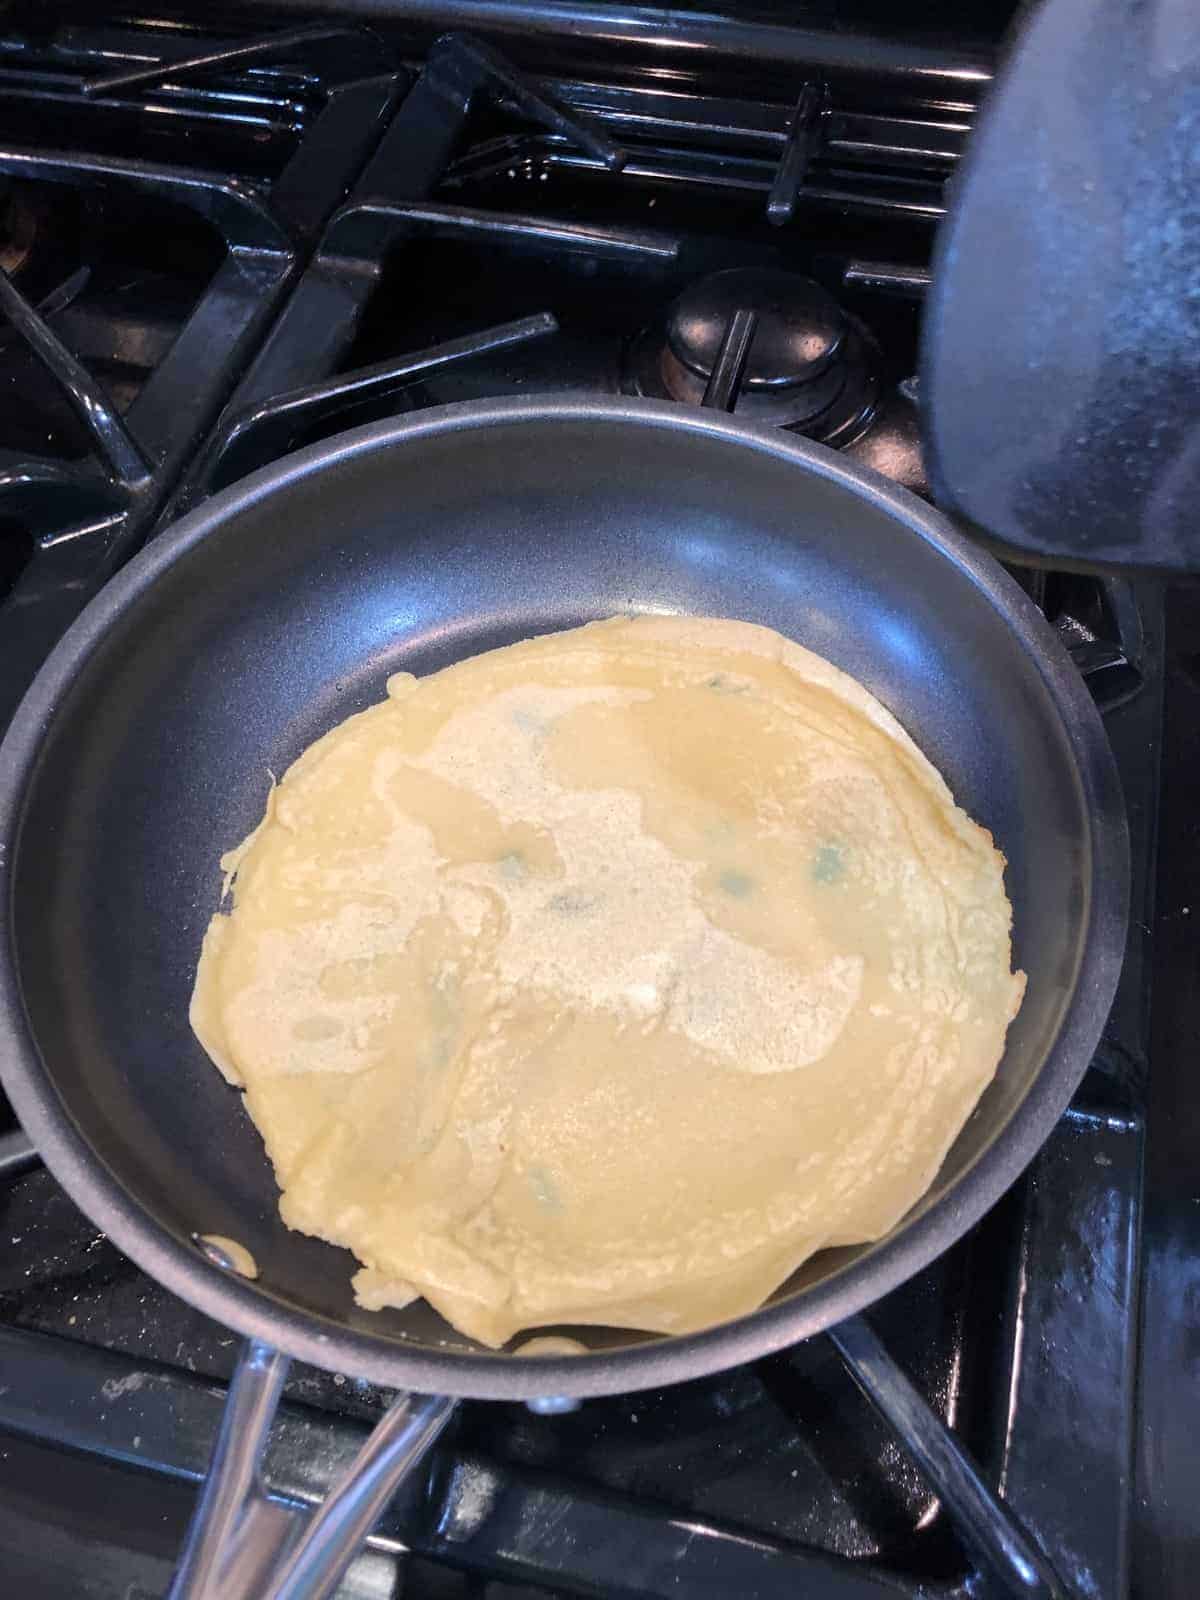 Chickpea Crepe in the pan cooking on a gas stove